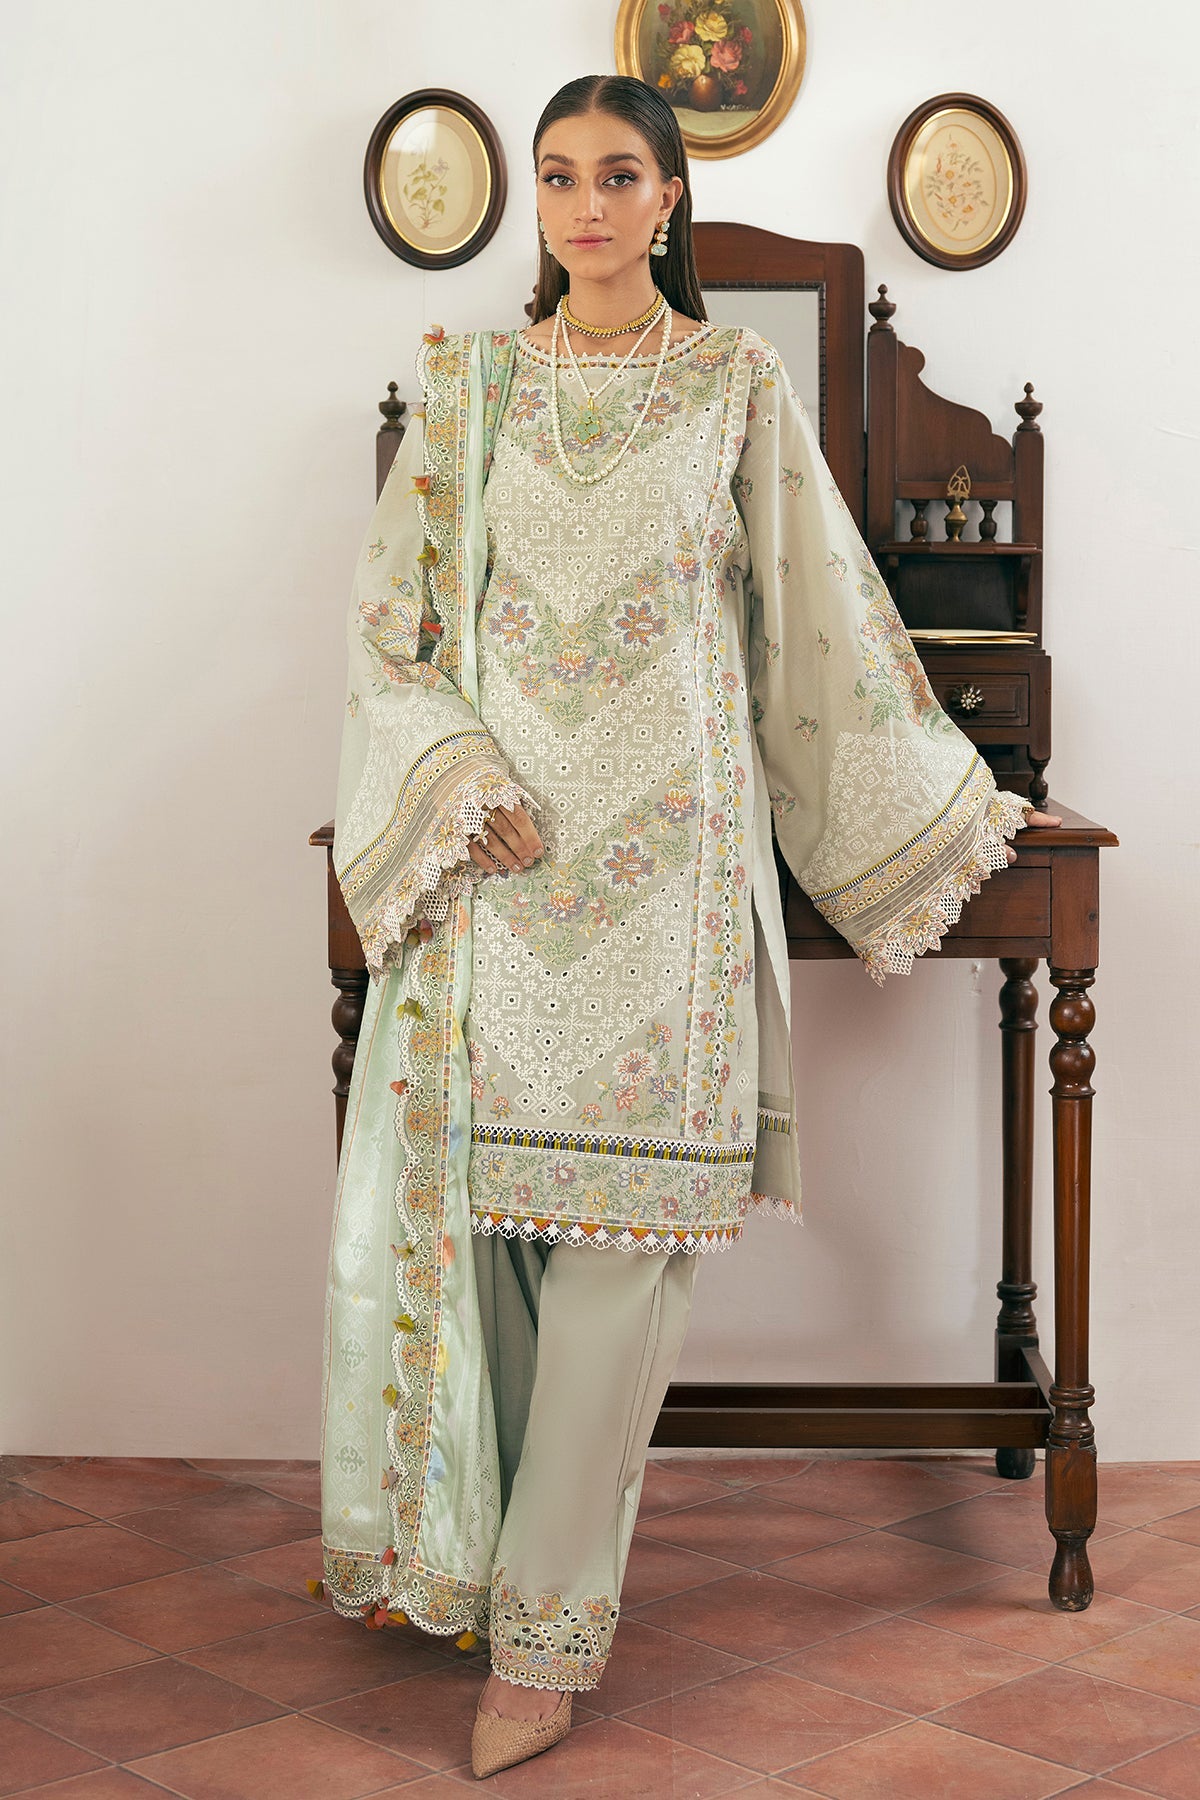 Shop Now, D-07 - Embroidered Swiss Lawn 2023 - Baroque - Shahana Collection UK - Wedding and Bridal Party Dresses 